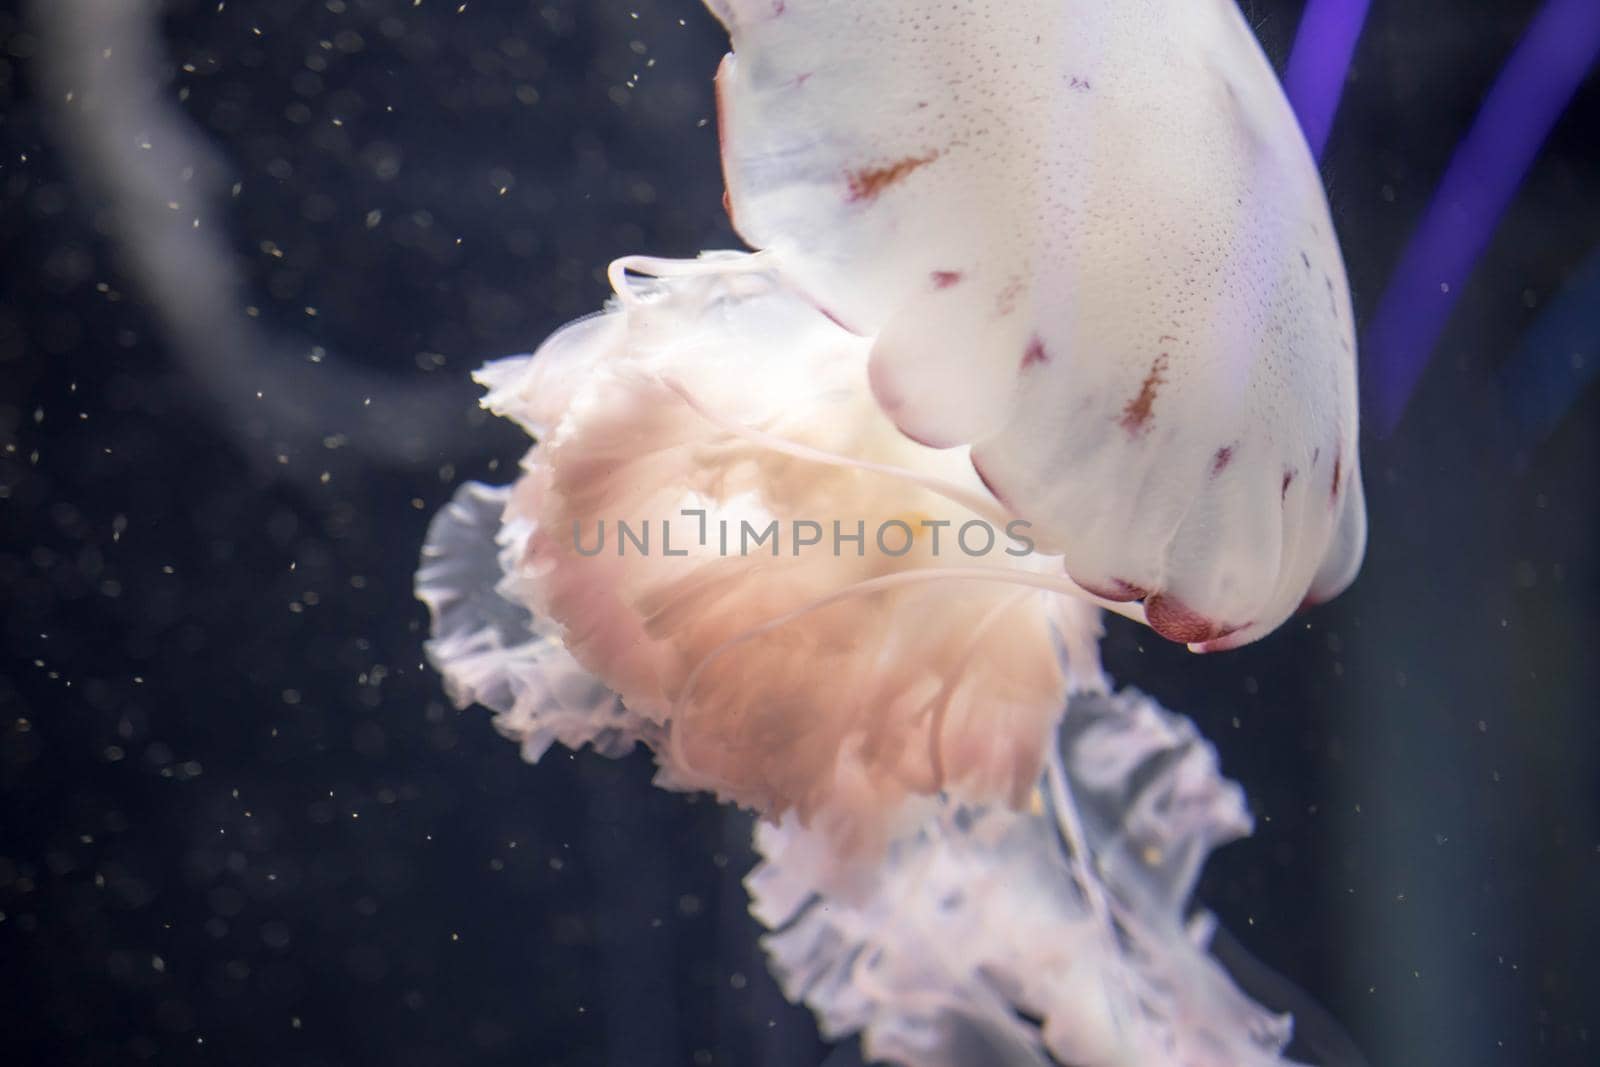 Blurry white colored jelly fishes floating on waters with long tentacles. White Pacific sea nettle by billroque